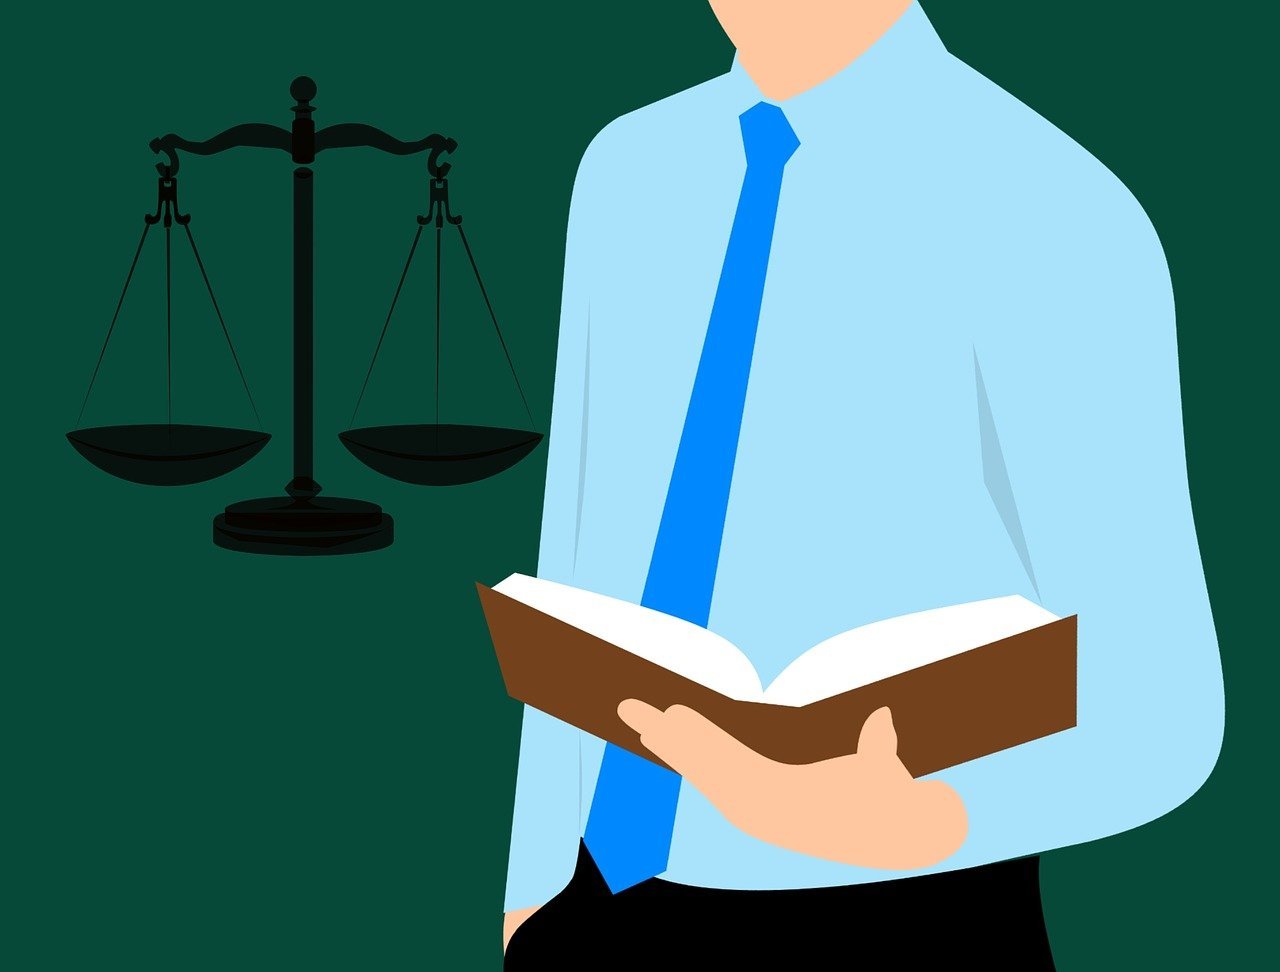 Why bar exam is important for lawyers?